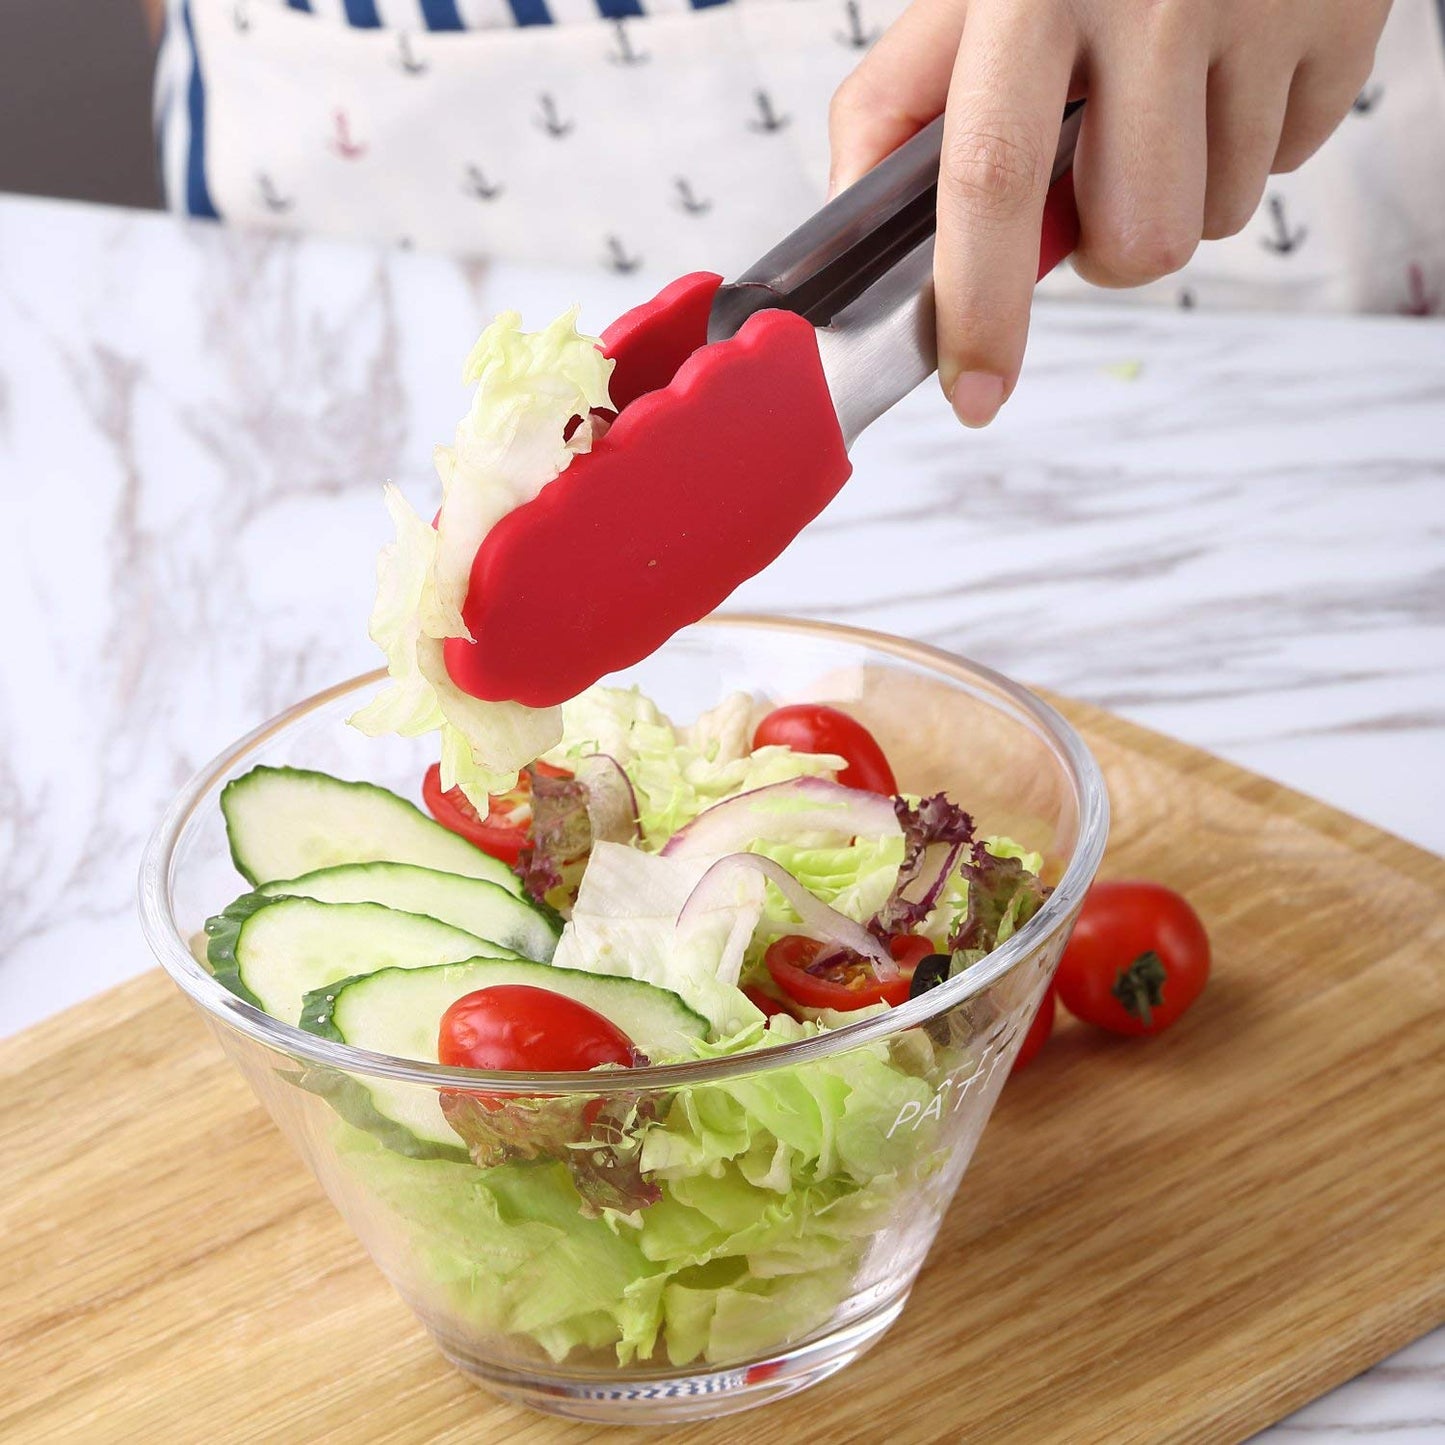 Premium Silicone Kitchen Tongs Heat Resistant Cooking BBQ Stainless Steel Handle